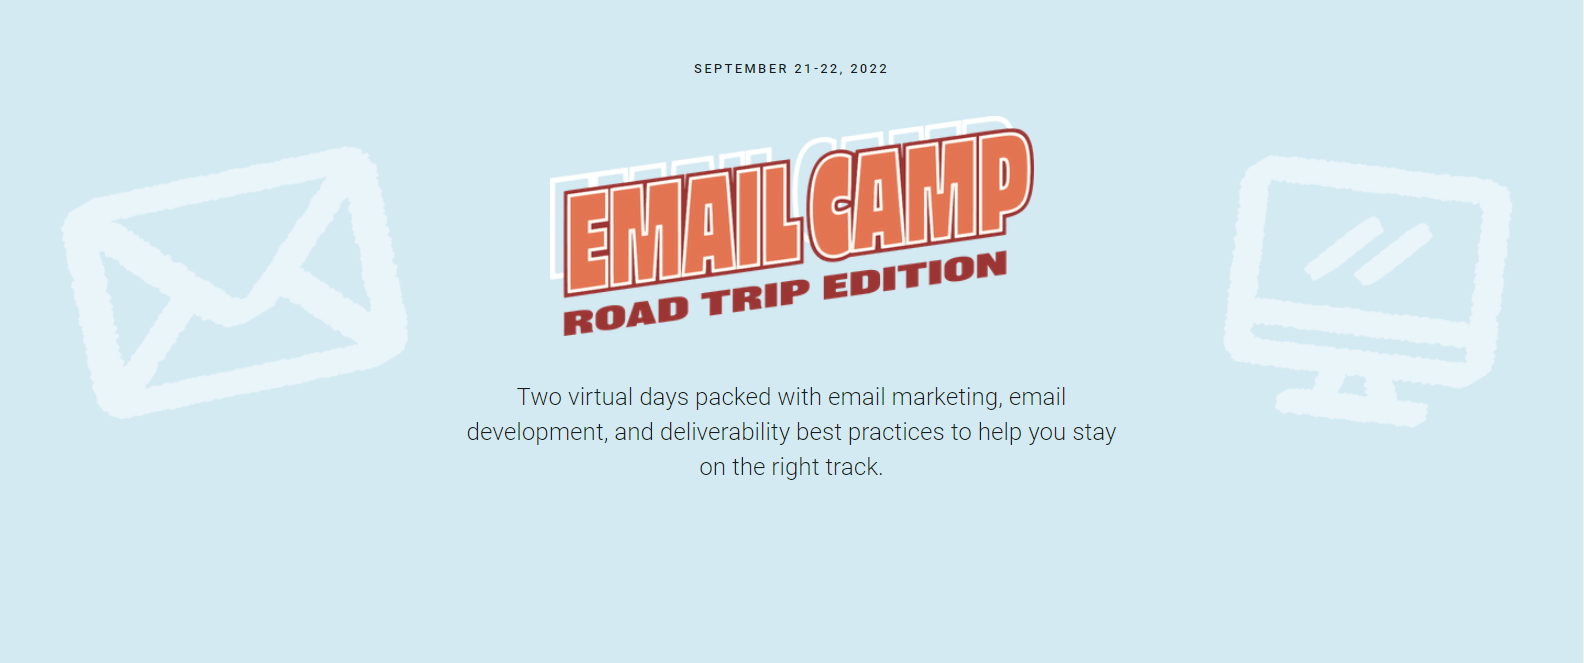 Email Camp 2022: Road Trip Edition